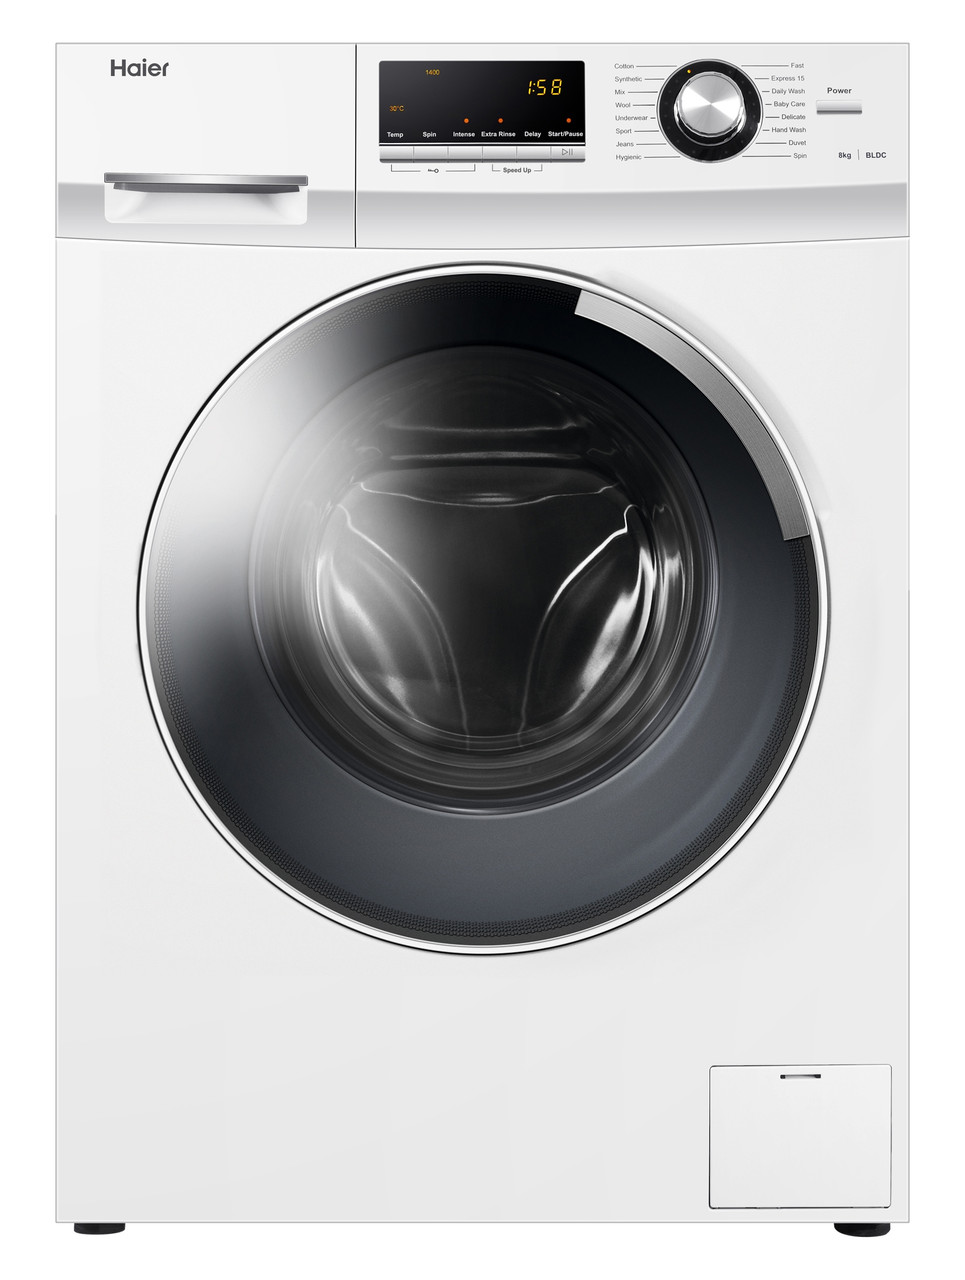 Haier 8kg Front Load Washing Machine Magness Benrow